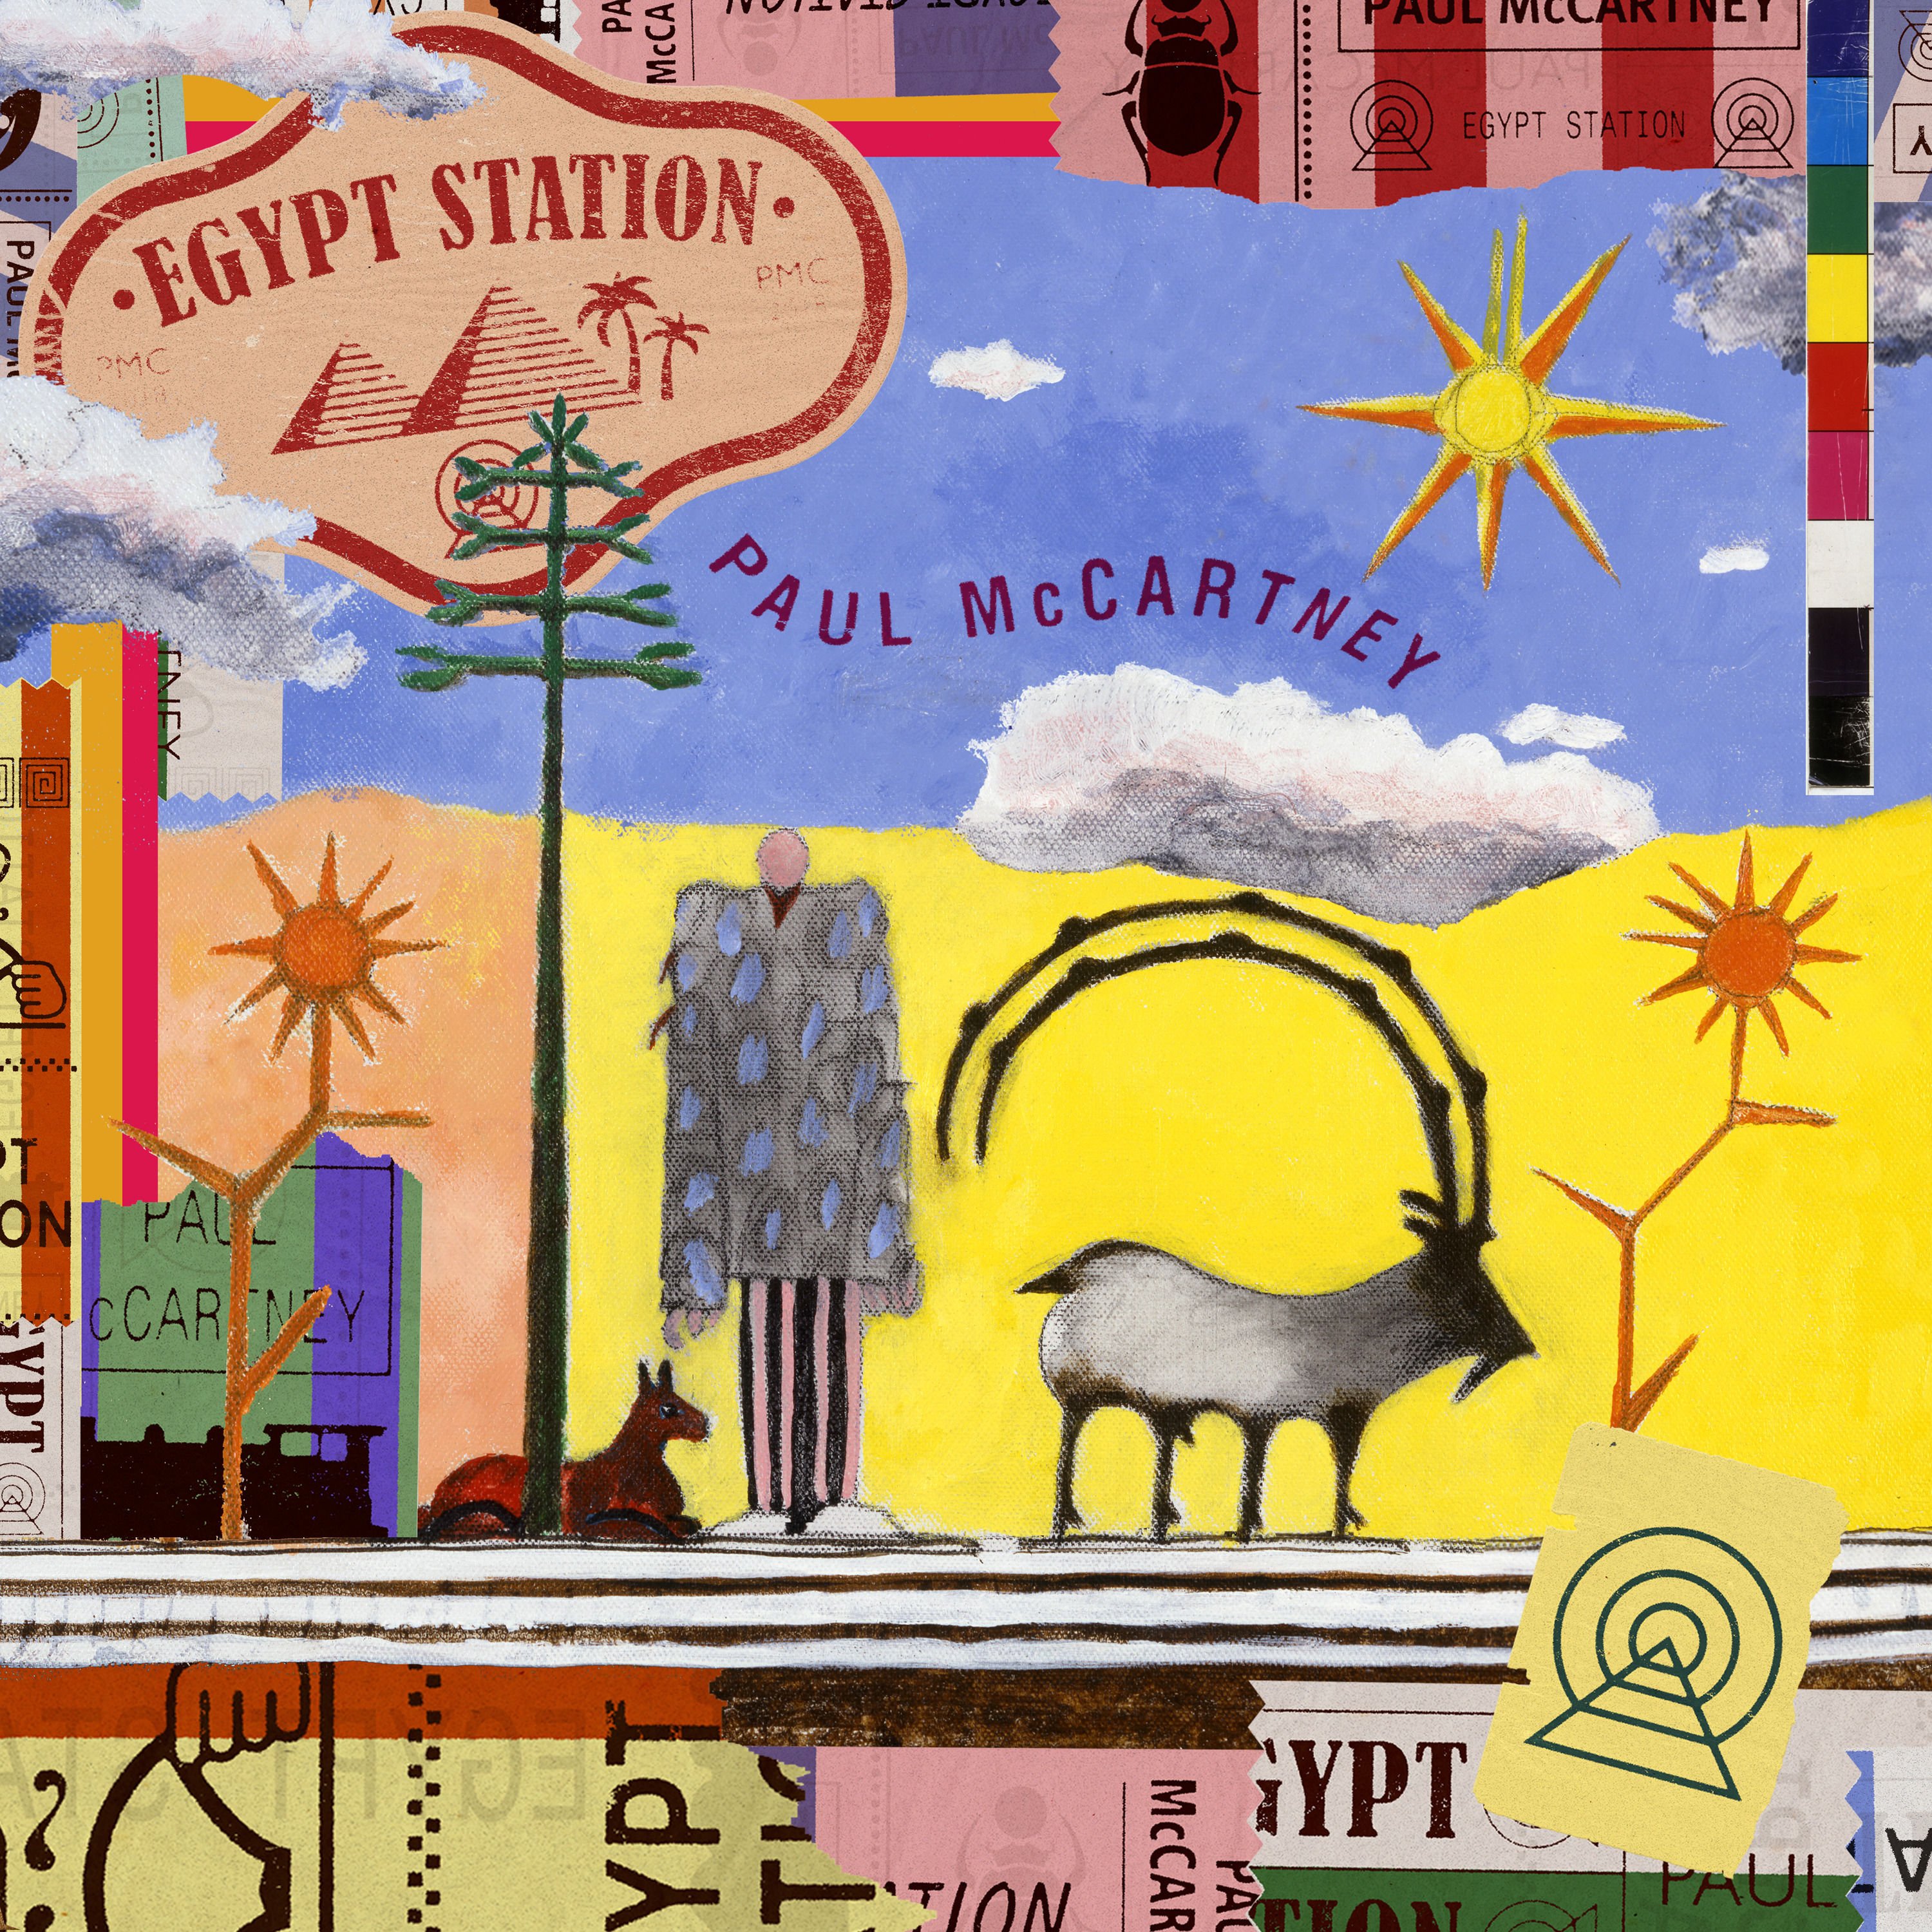 Paul McCartney-Egypt Station-24-96-WEB-FLAC-REMASTERED DELUXE EDITION-2019-OBZEN